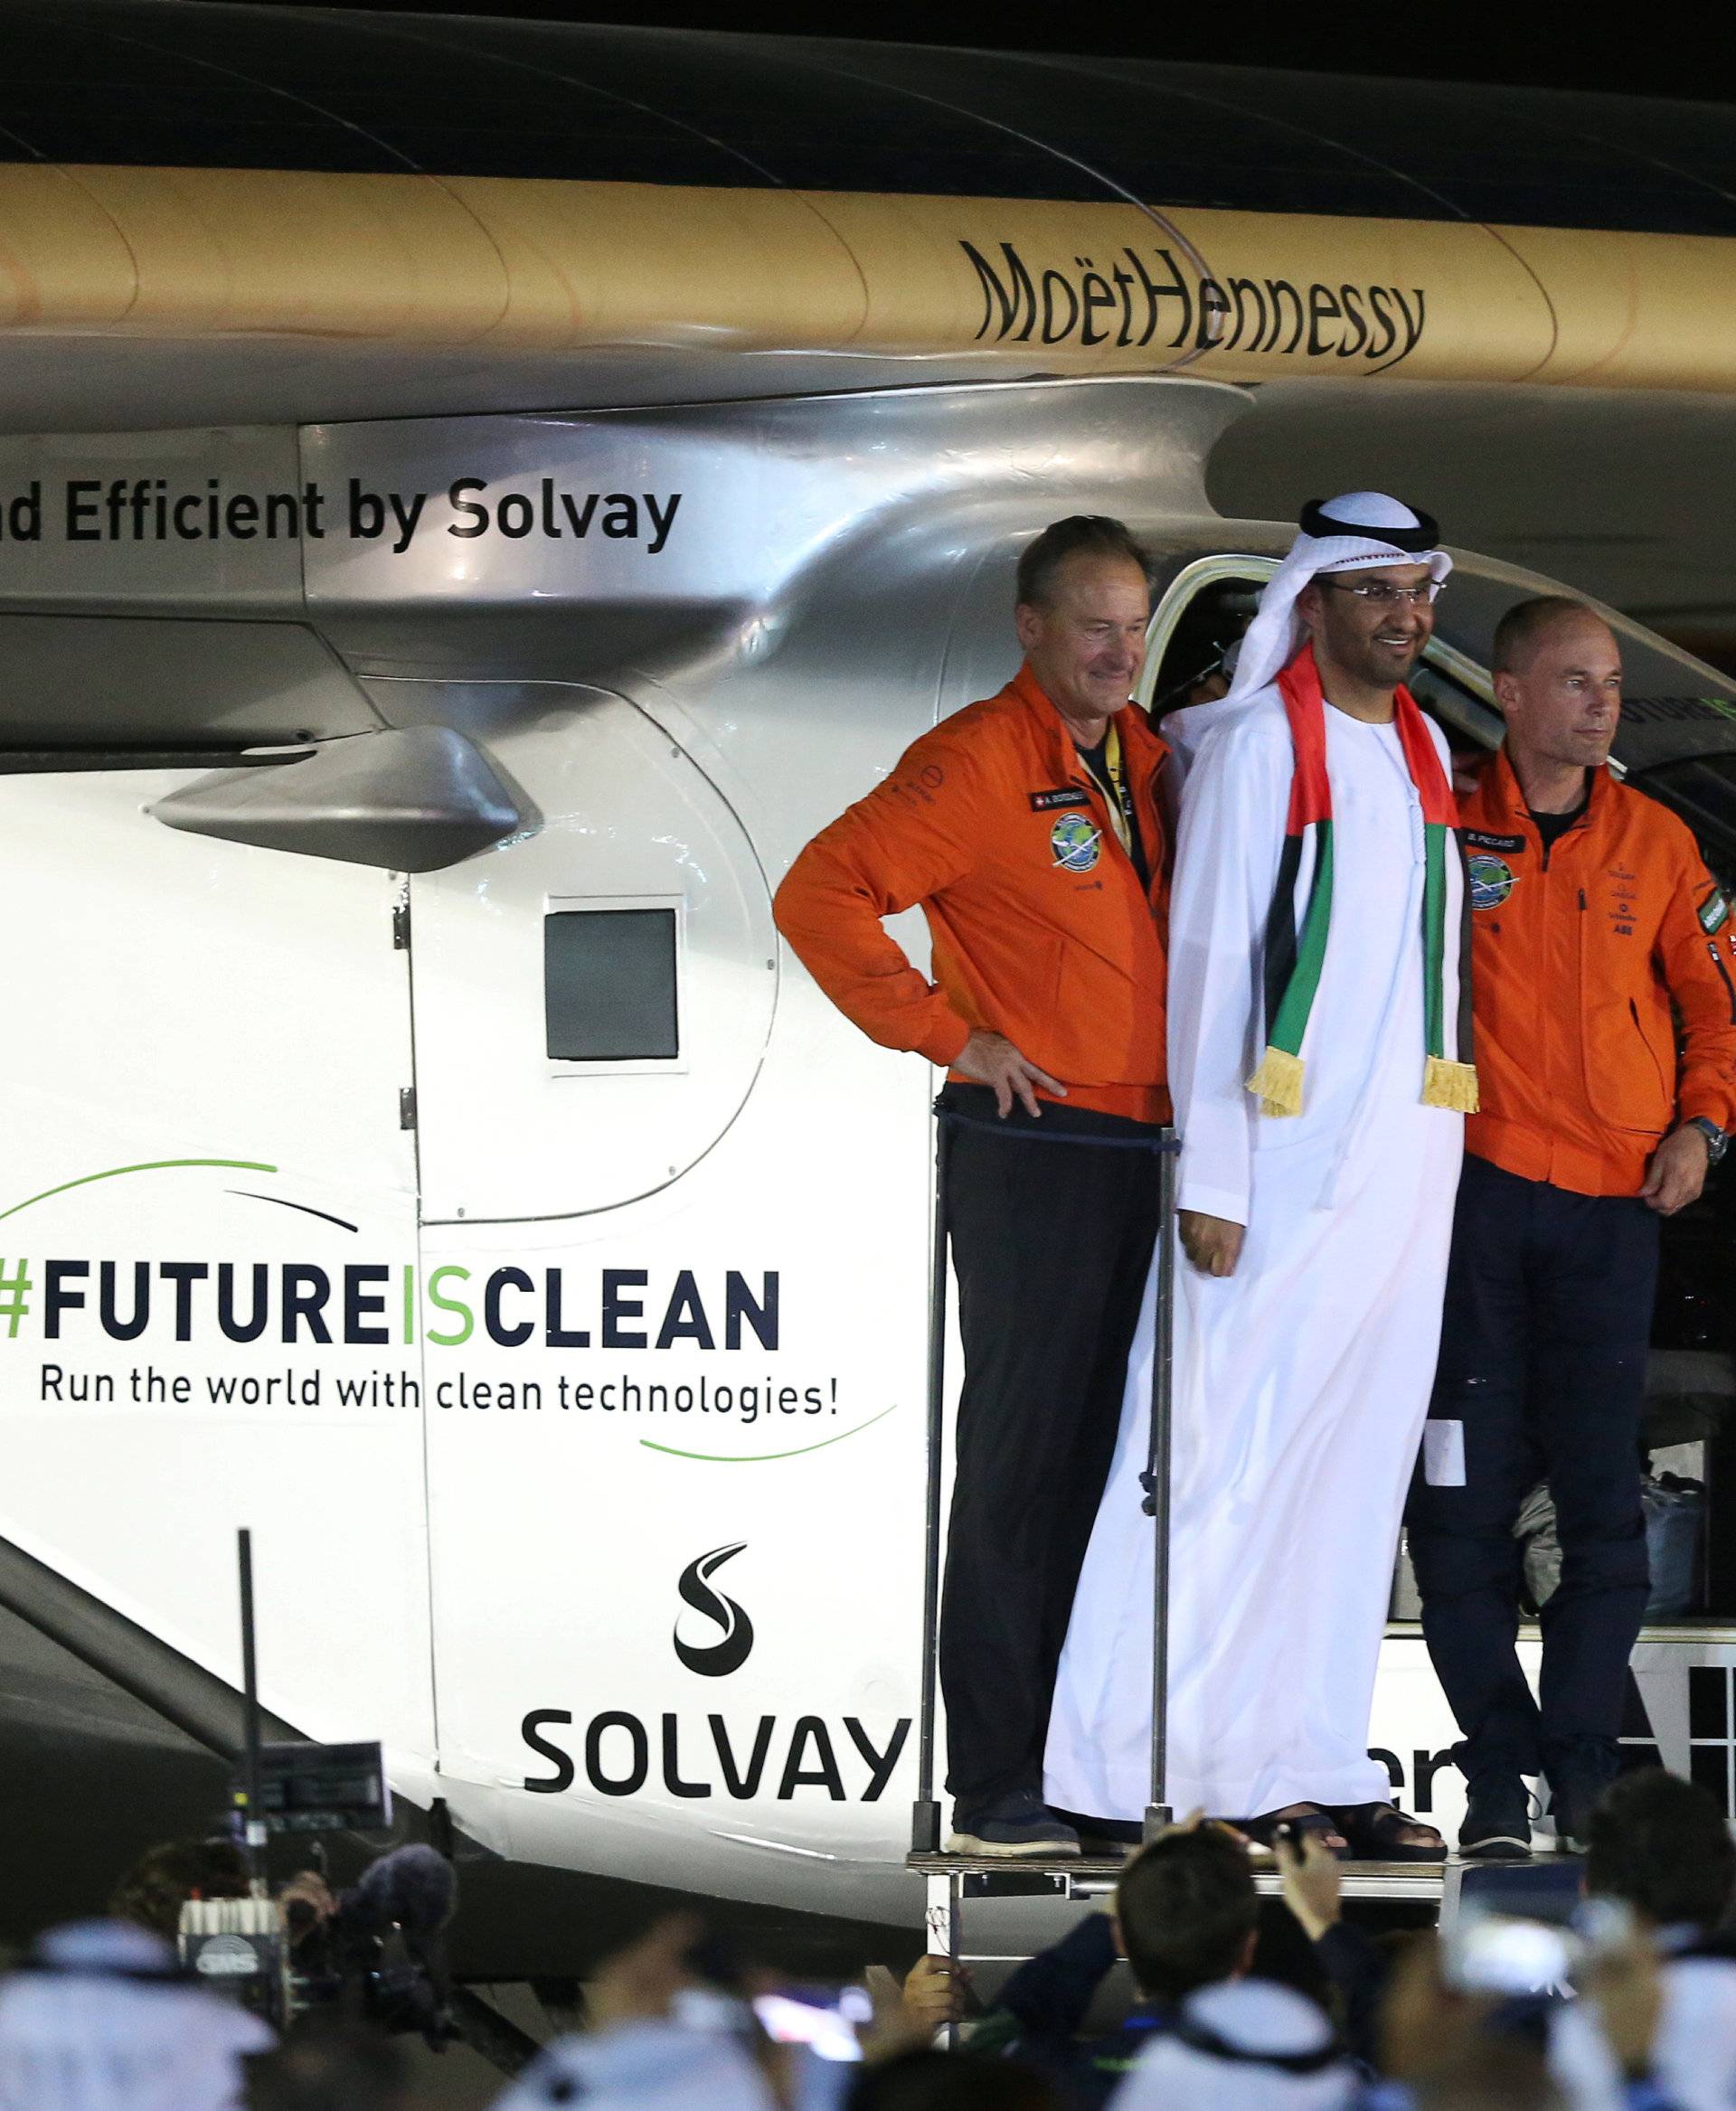 Pilot Andre Borschberg and Bertrand Piccard pose with Sultan Ahmed al-Jaber following the arrival of Solar Impulse 2, a solar powered plane, at an airport in Abu Dhabi